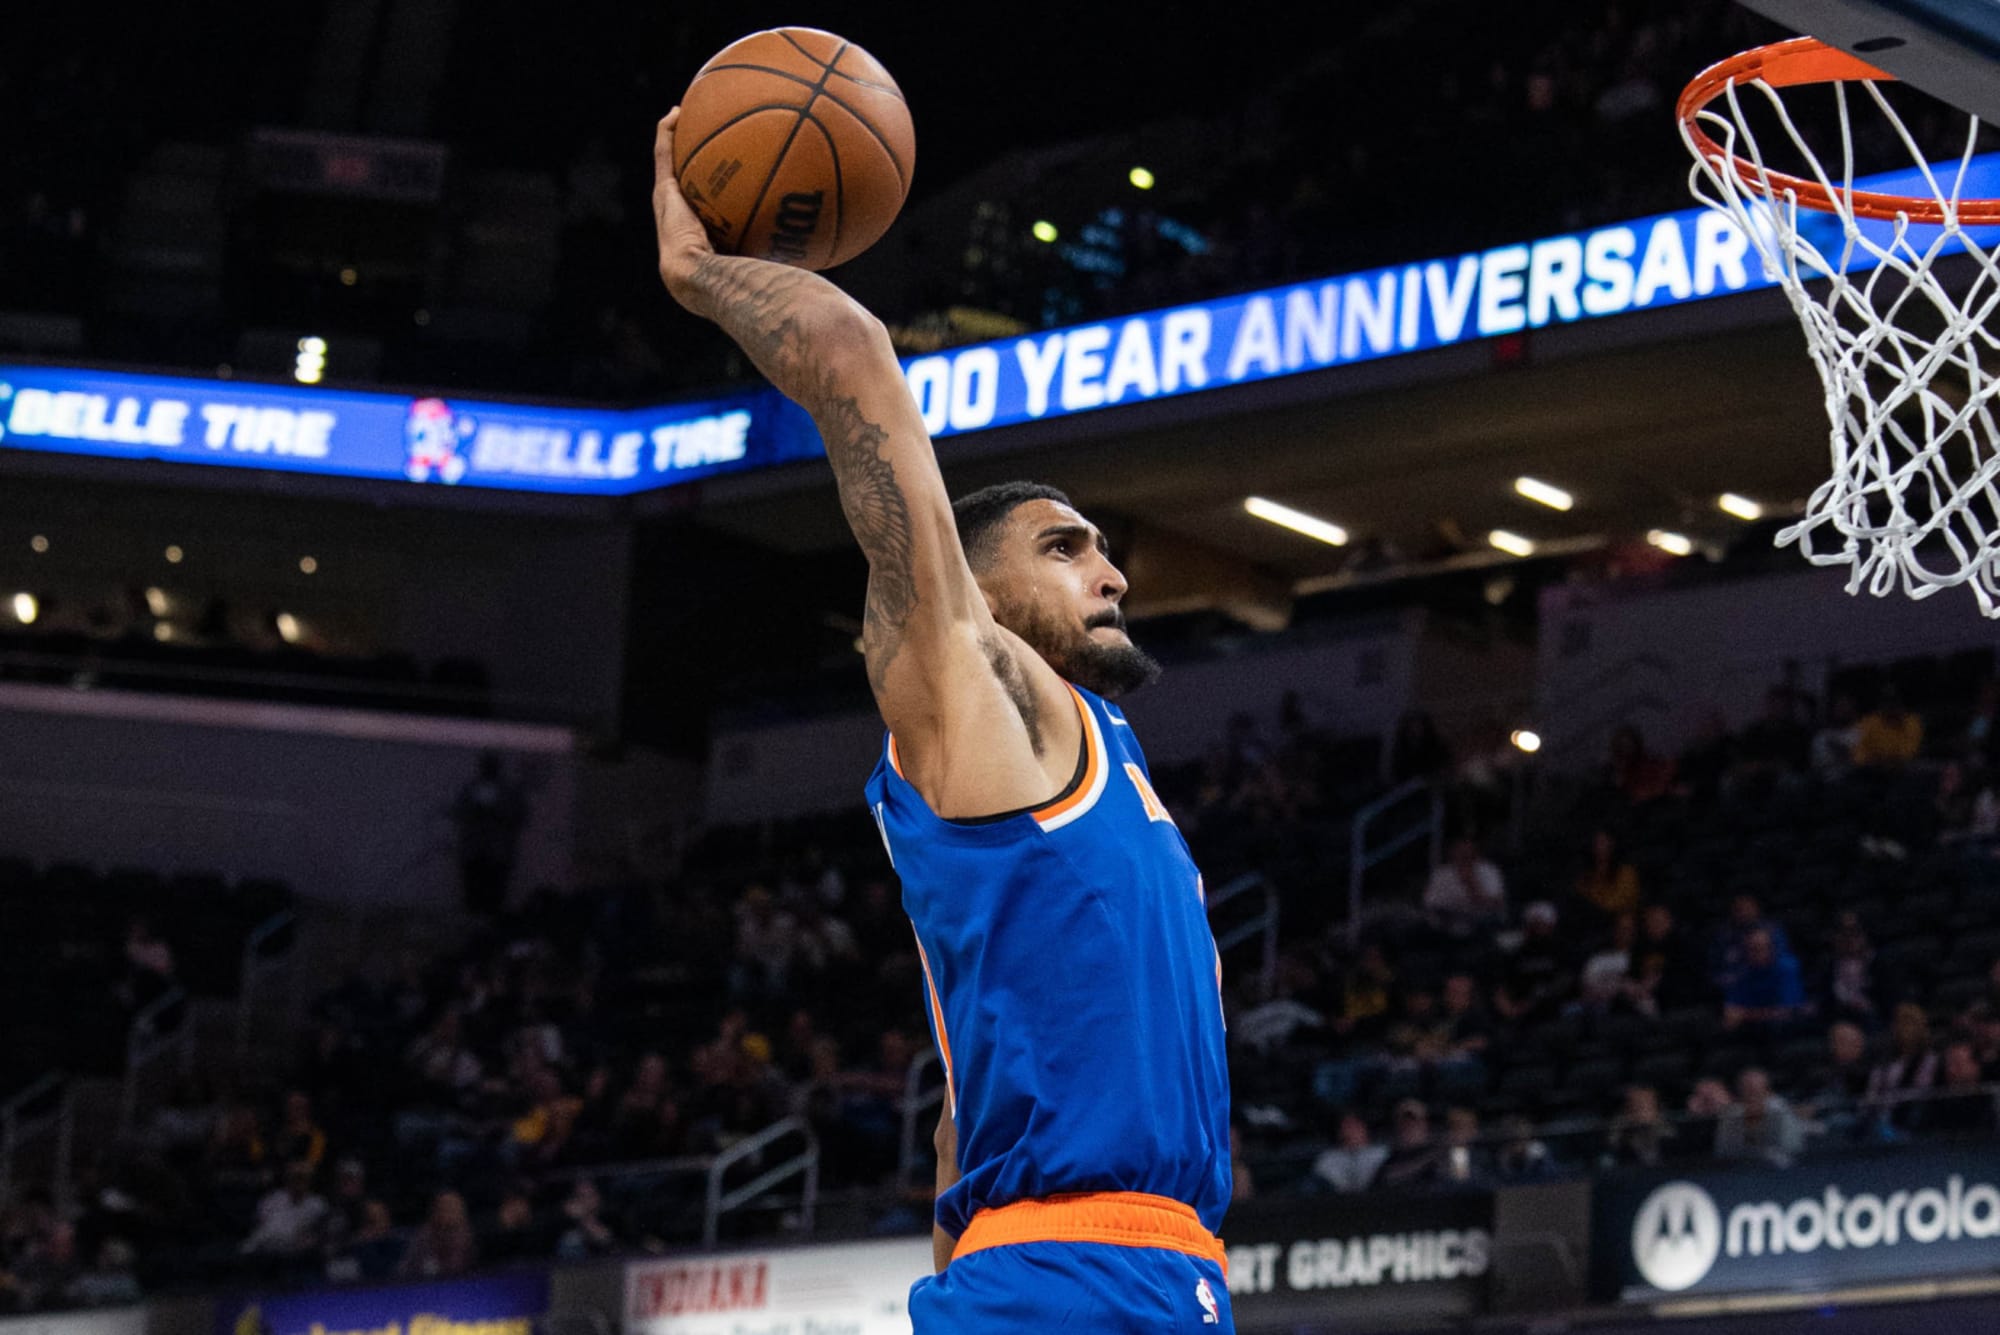 Pacers to acquire Obi Toppin from Knicks for 2nd-rounders per report